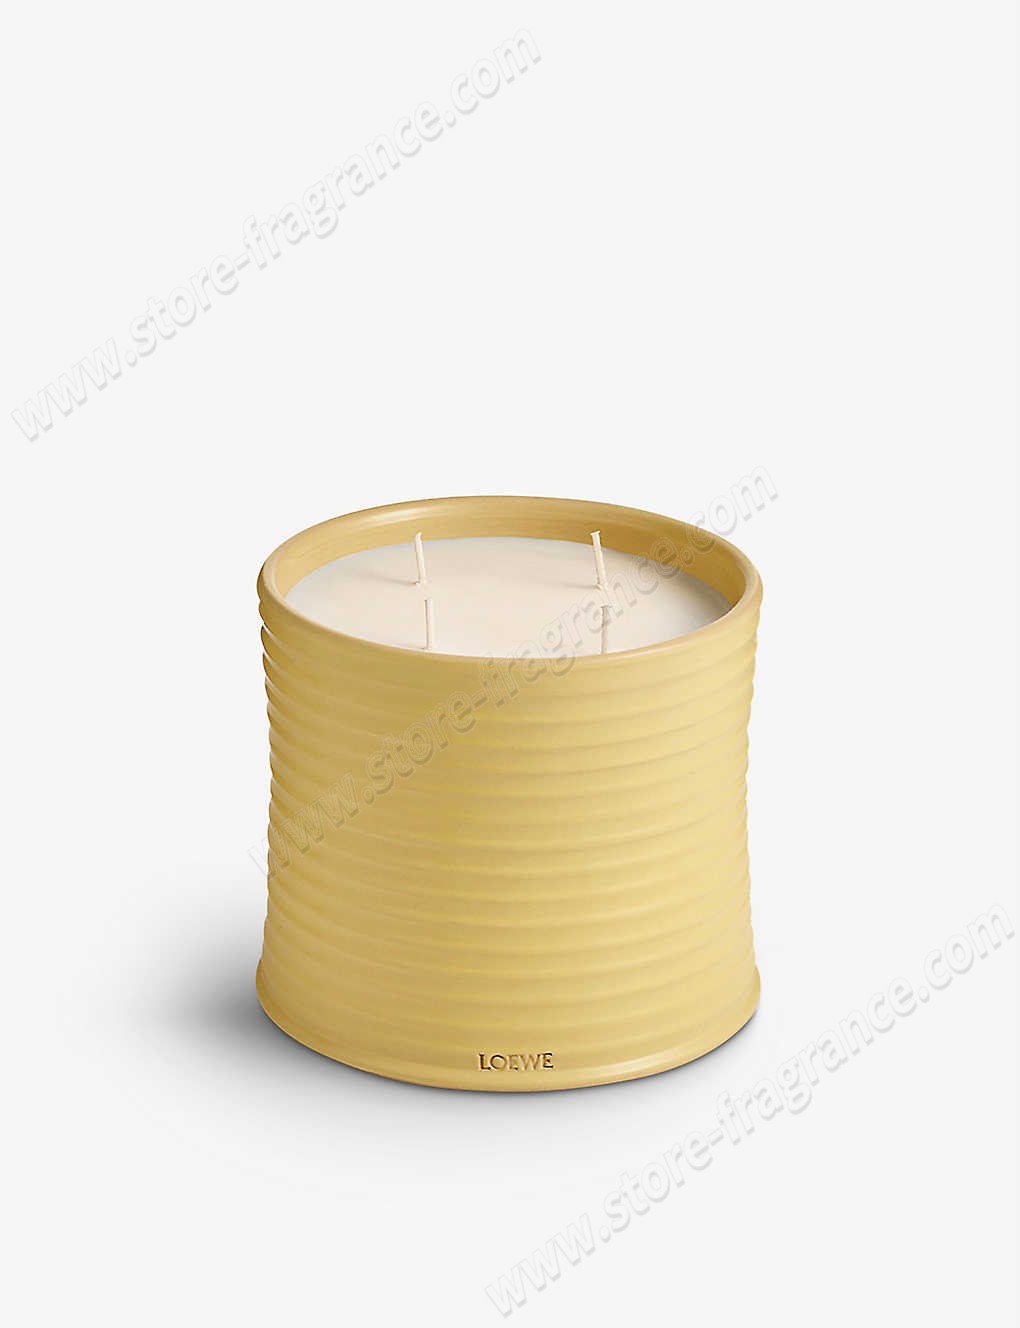 LOEWE/Honeysuckle large scented candle 2120g ✿ Discount Store - LOEWE/Honeysuckle large scented candle 2120g ✿ Discount Store